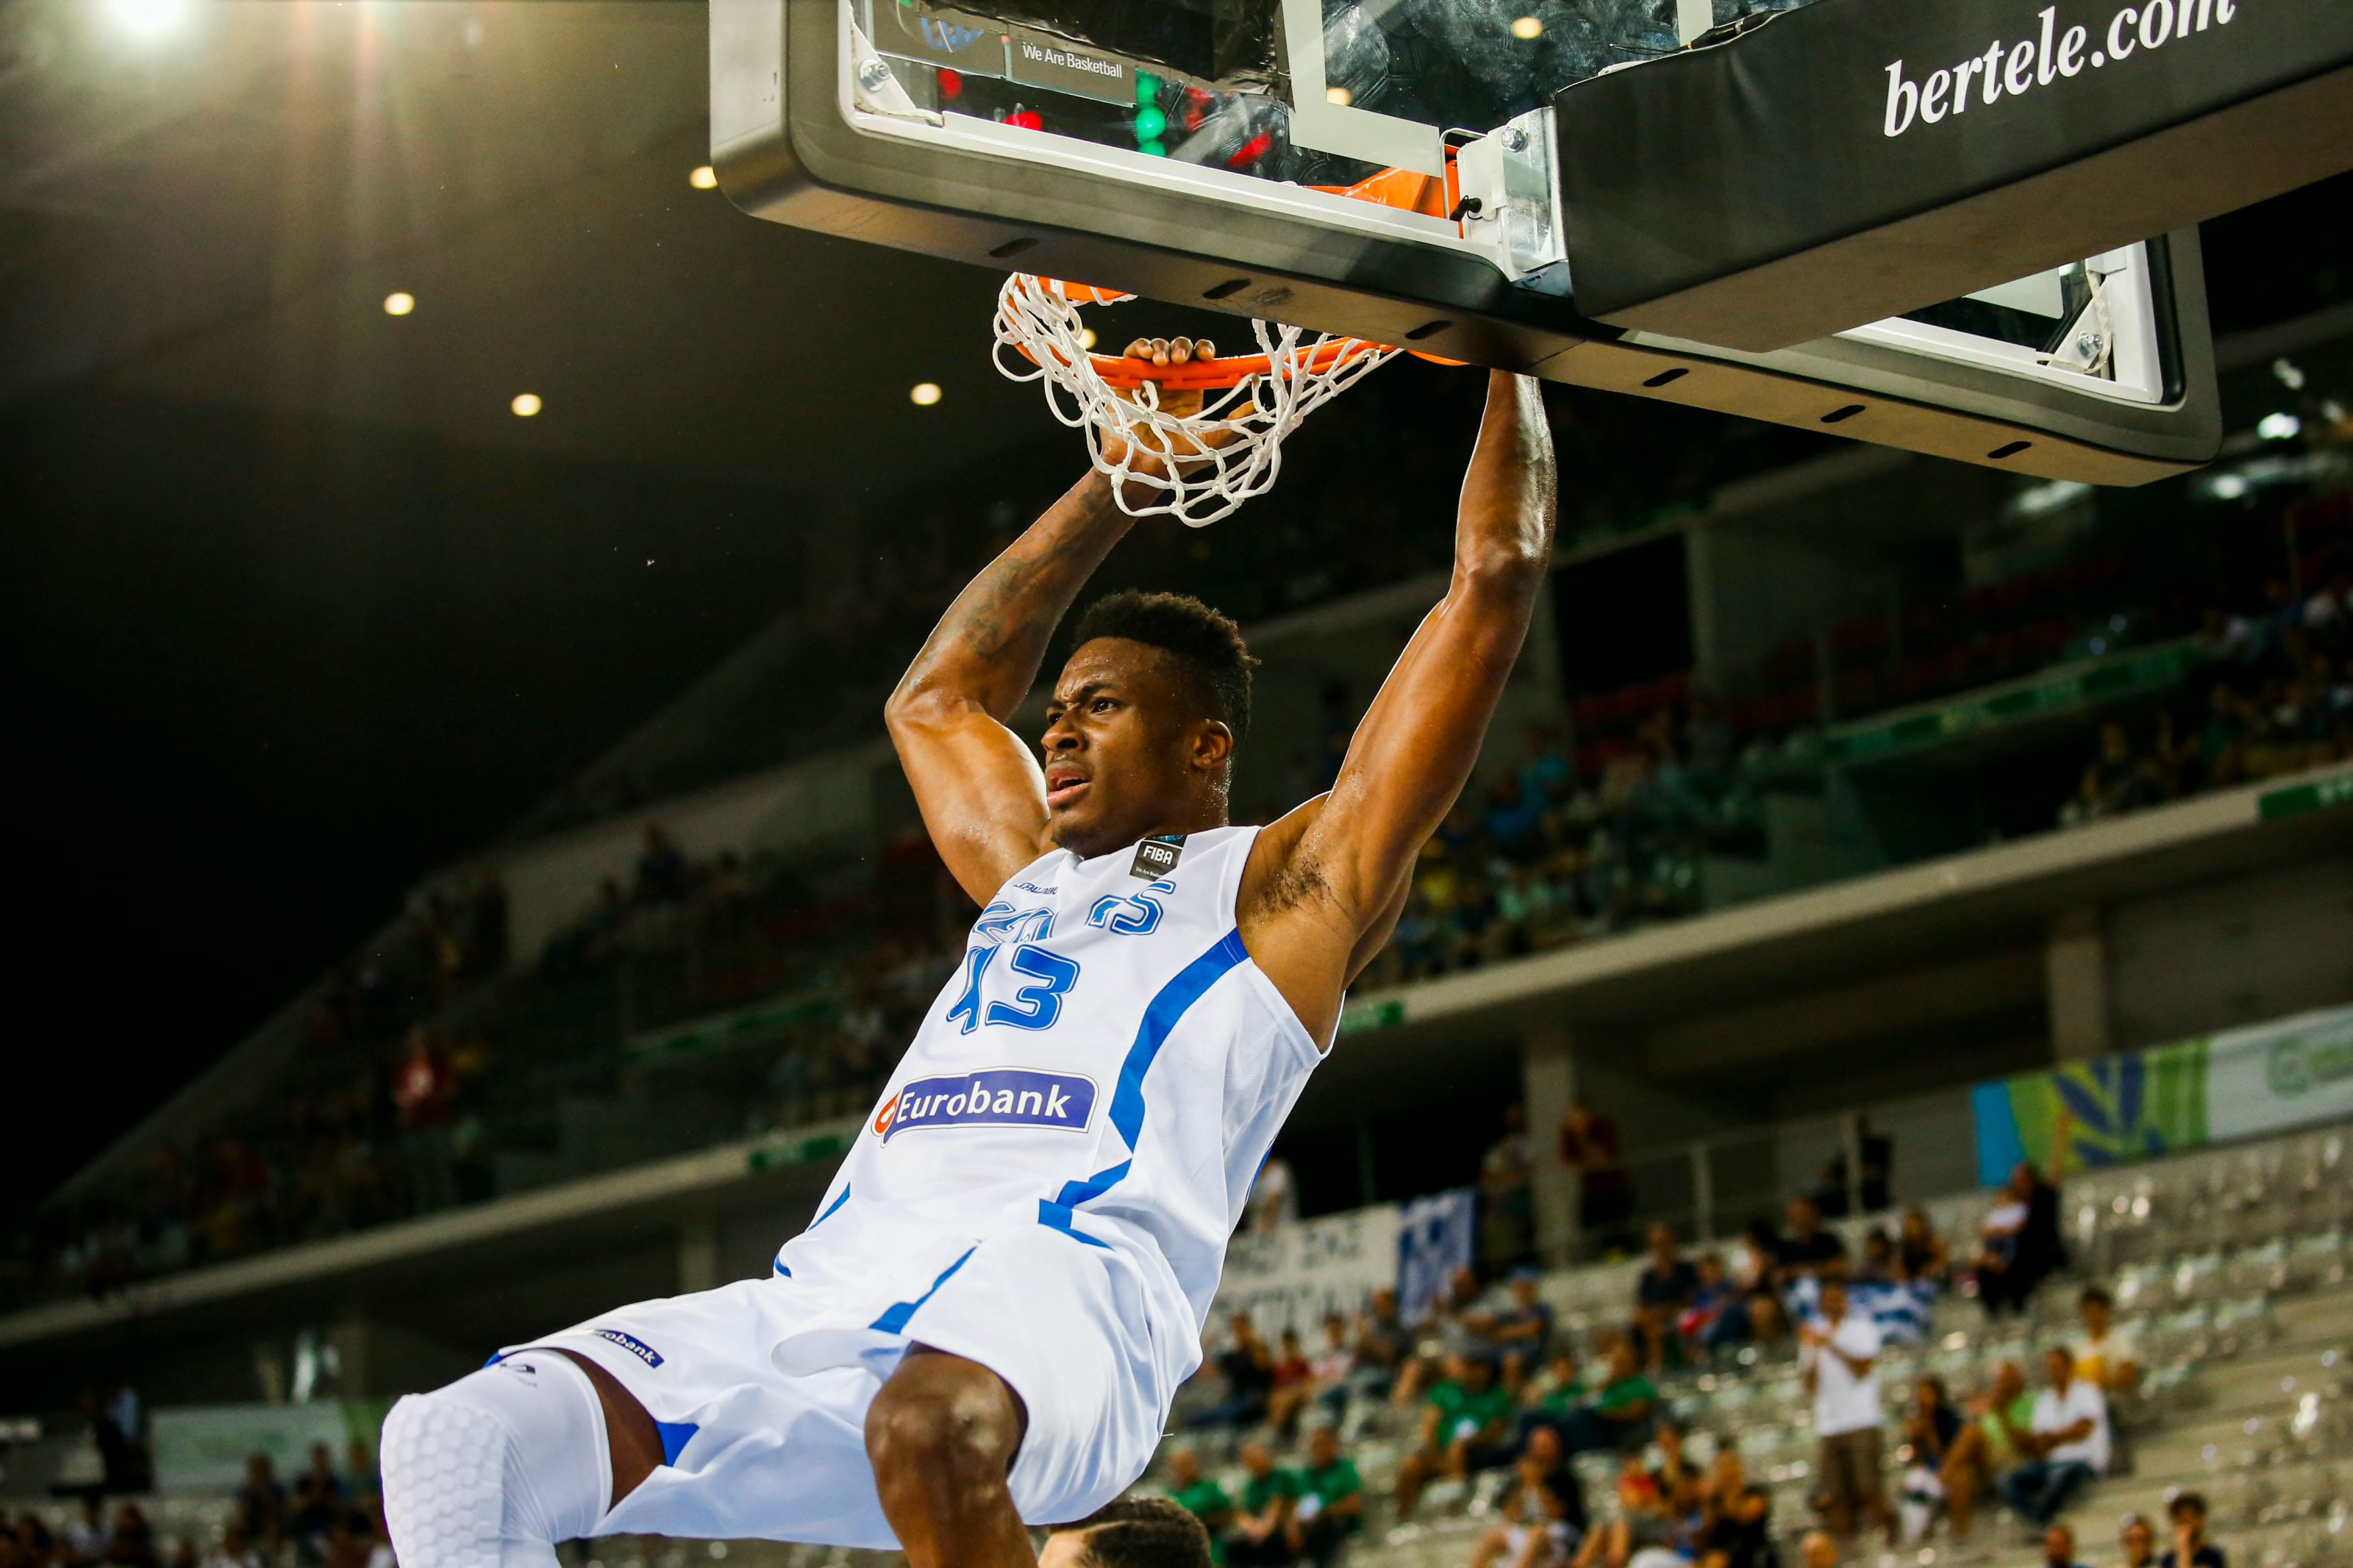 Thanasis Antetokounmpo Gets Dunked On Luxembourg, SAVE 51